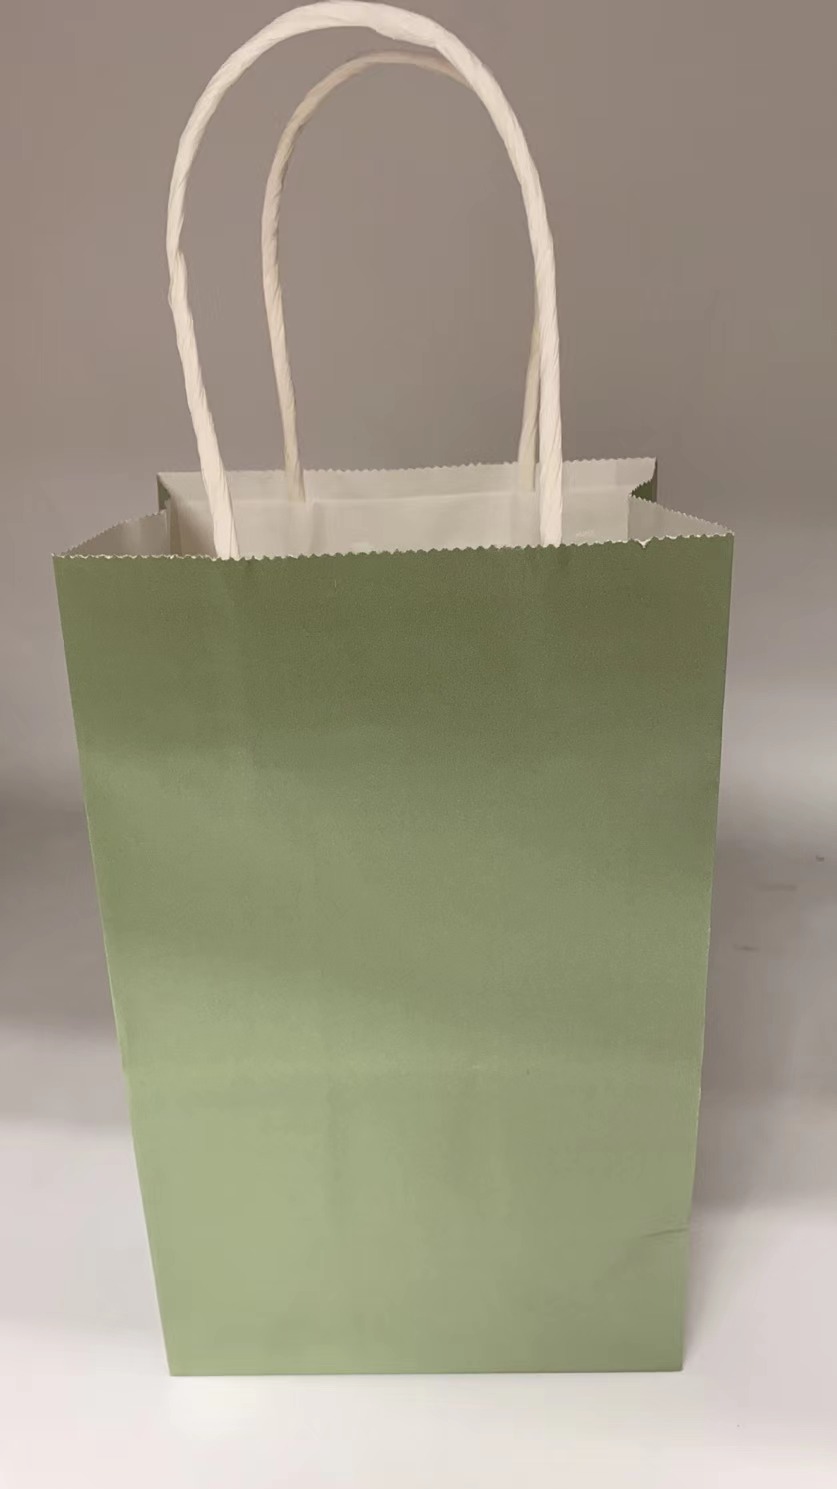 Avocado Green candy bags 12ct.